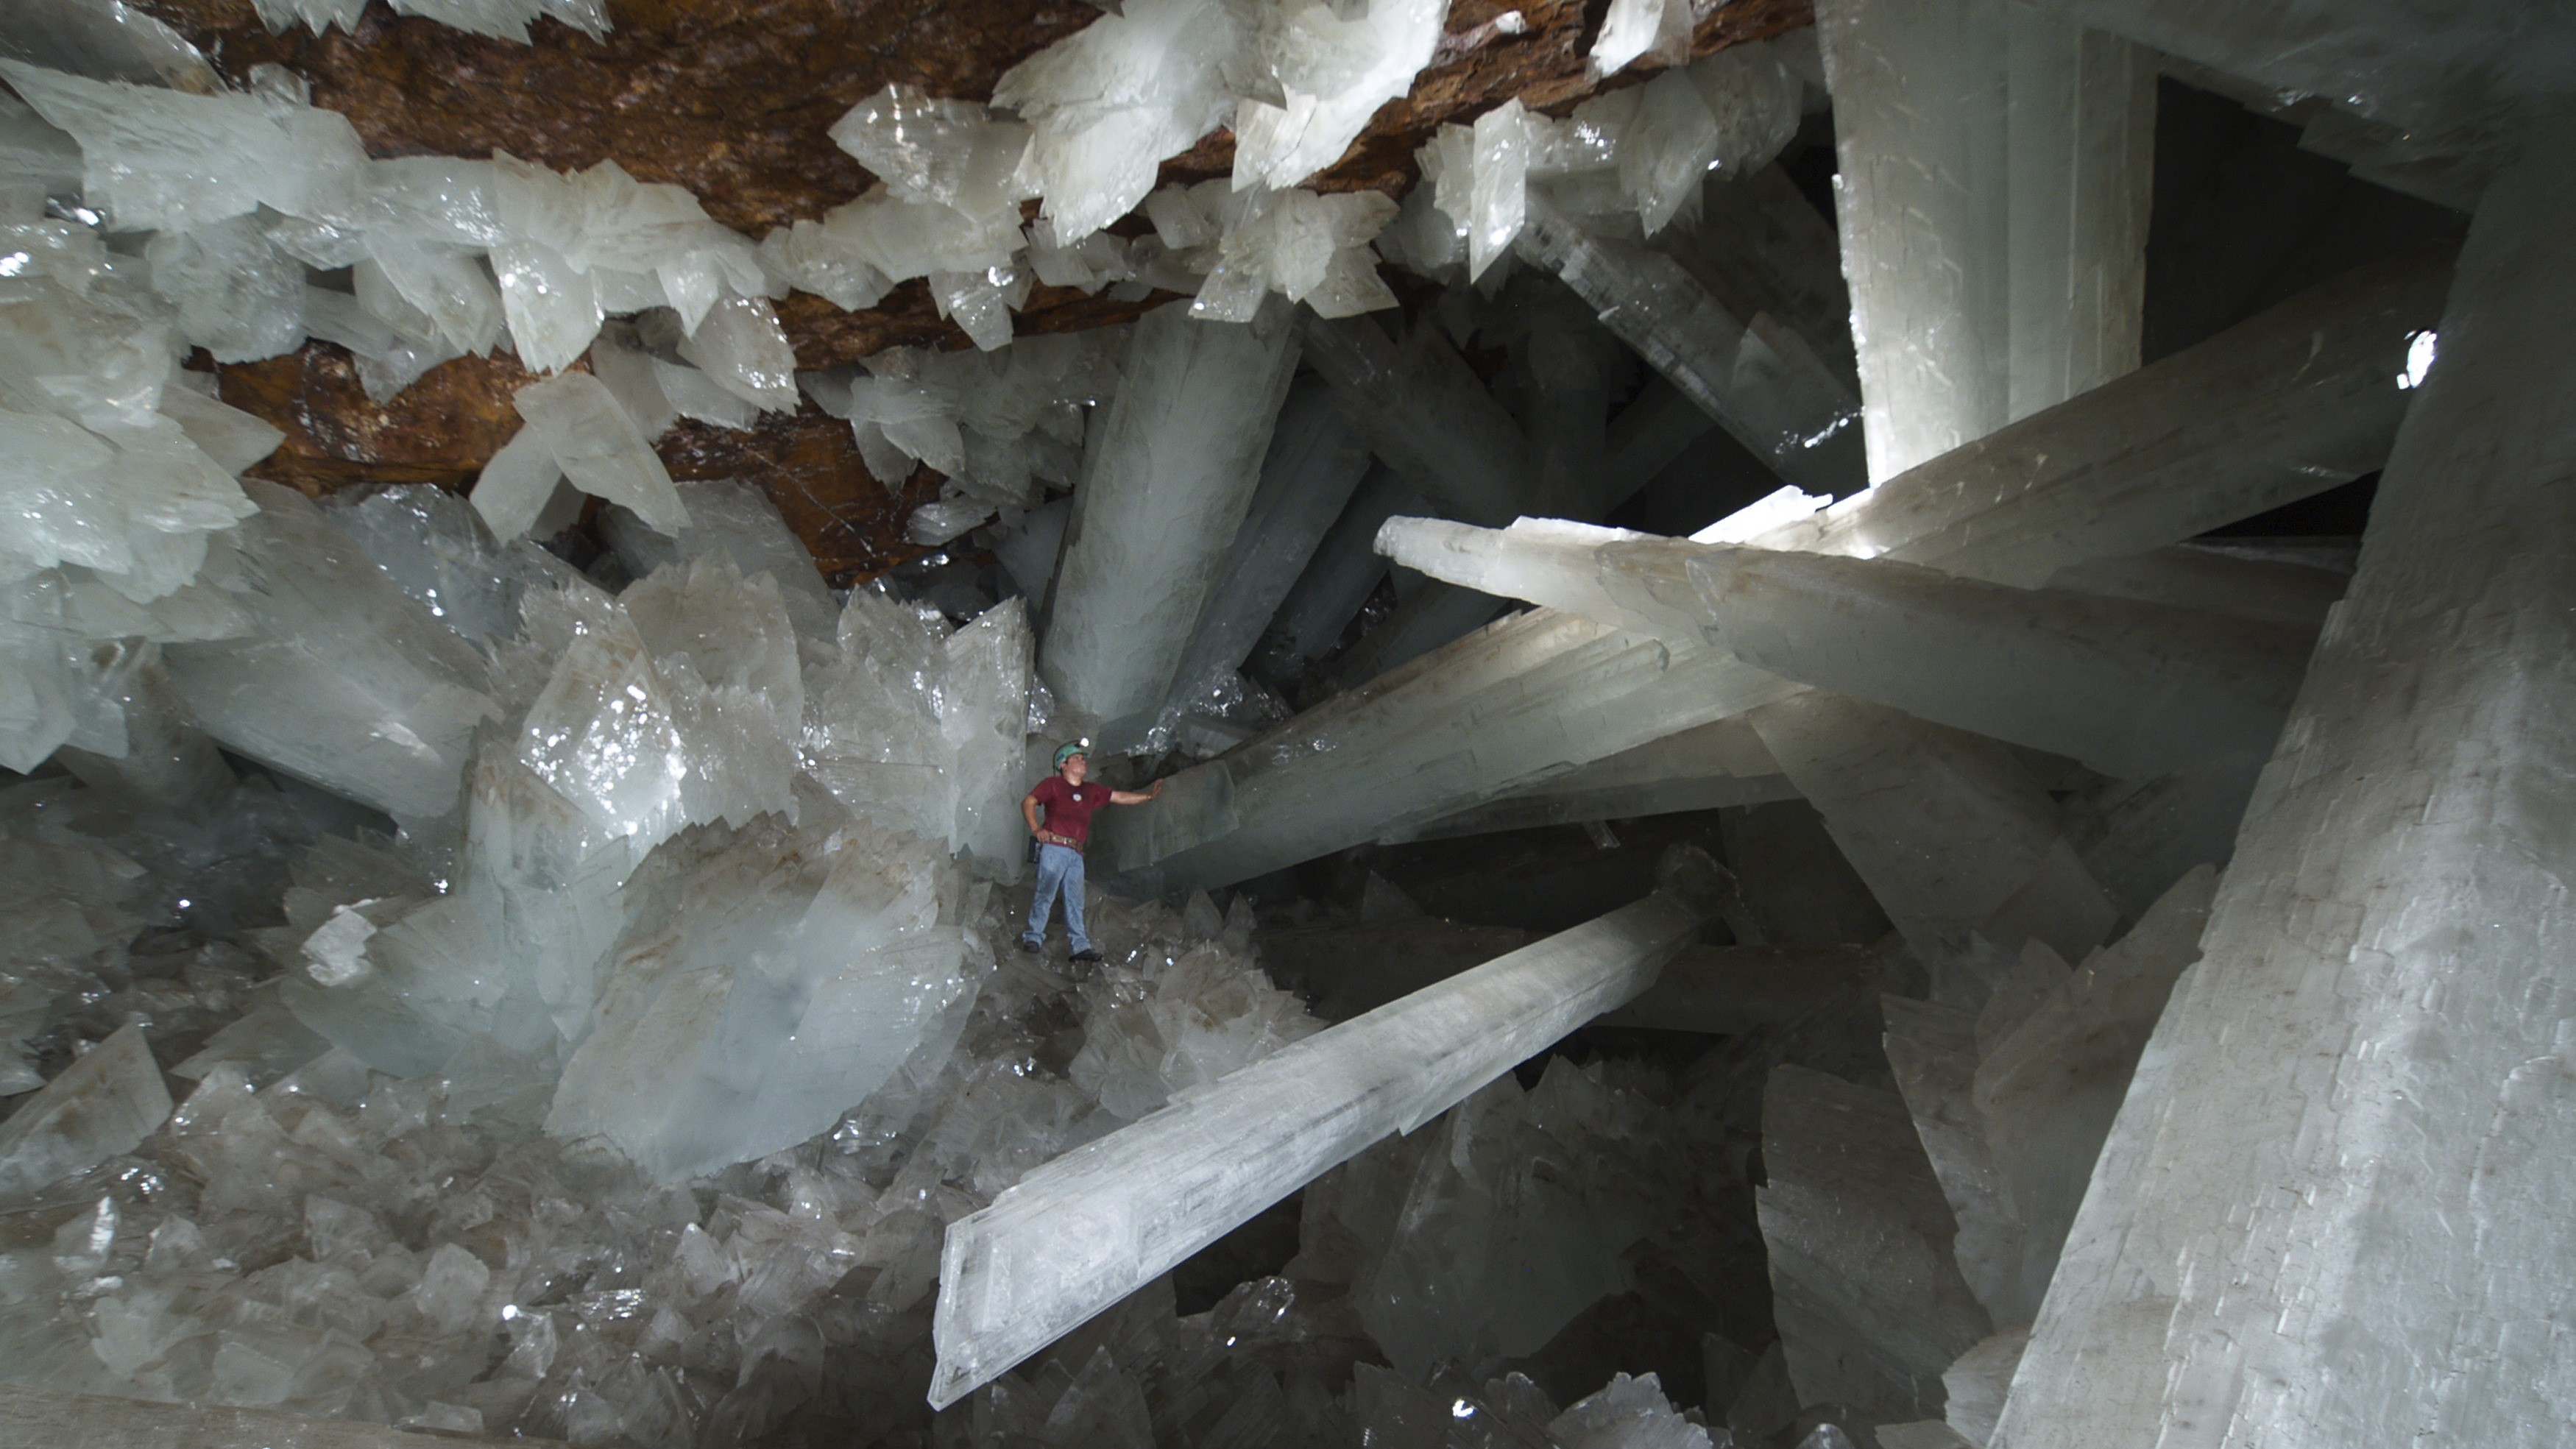 Cave of Crystals: The deadly cavern in Mexico dubbed 'the Sistine Chapel of crystals'